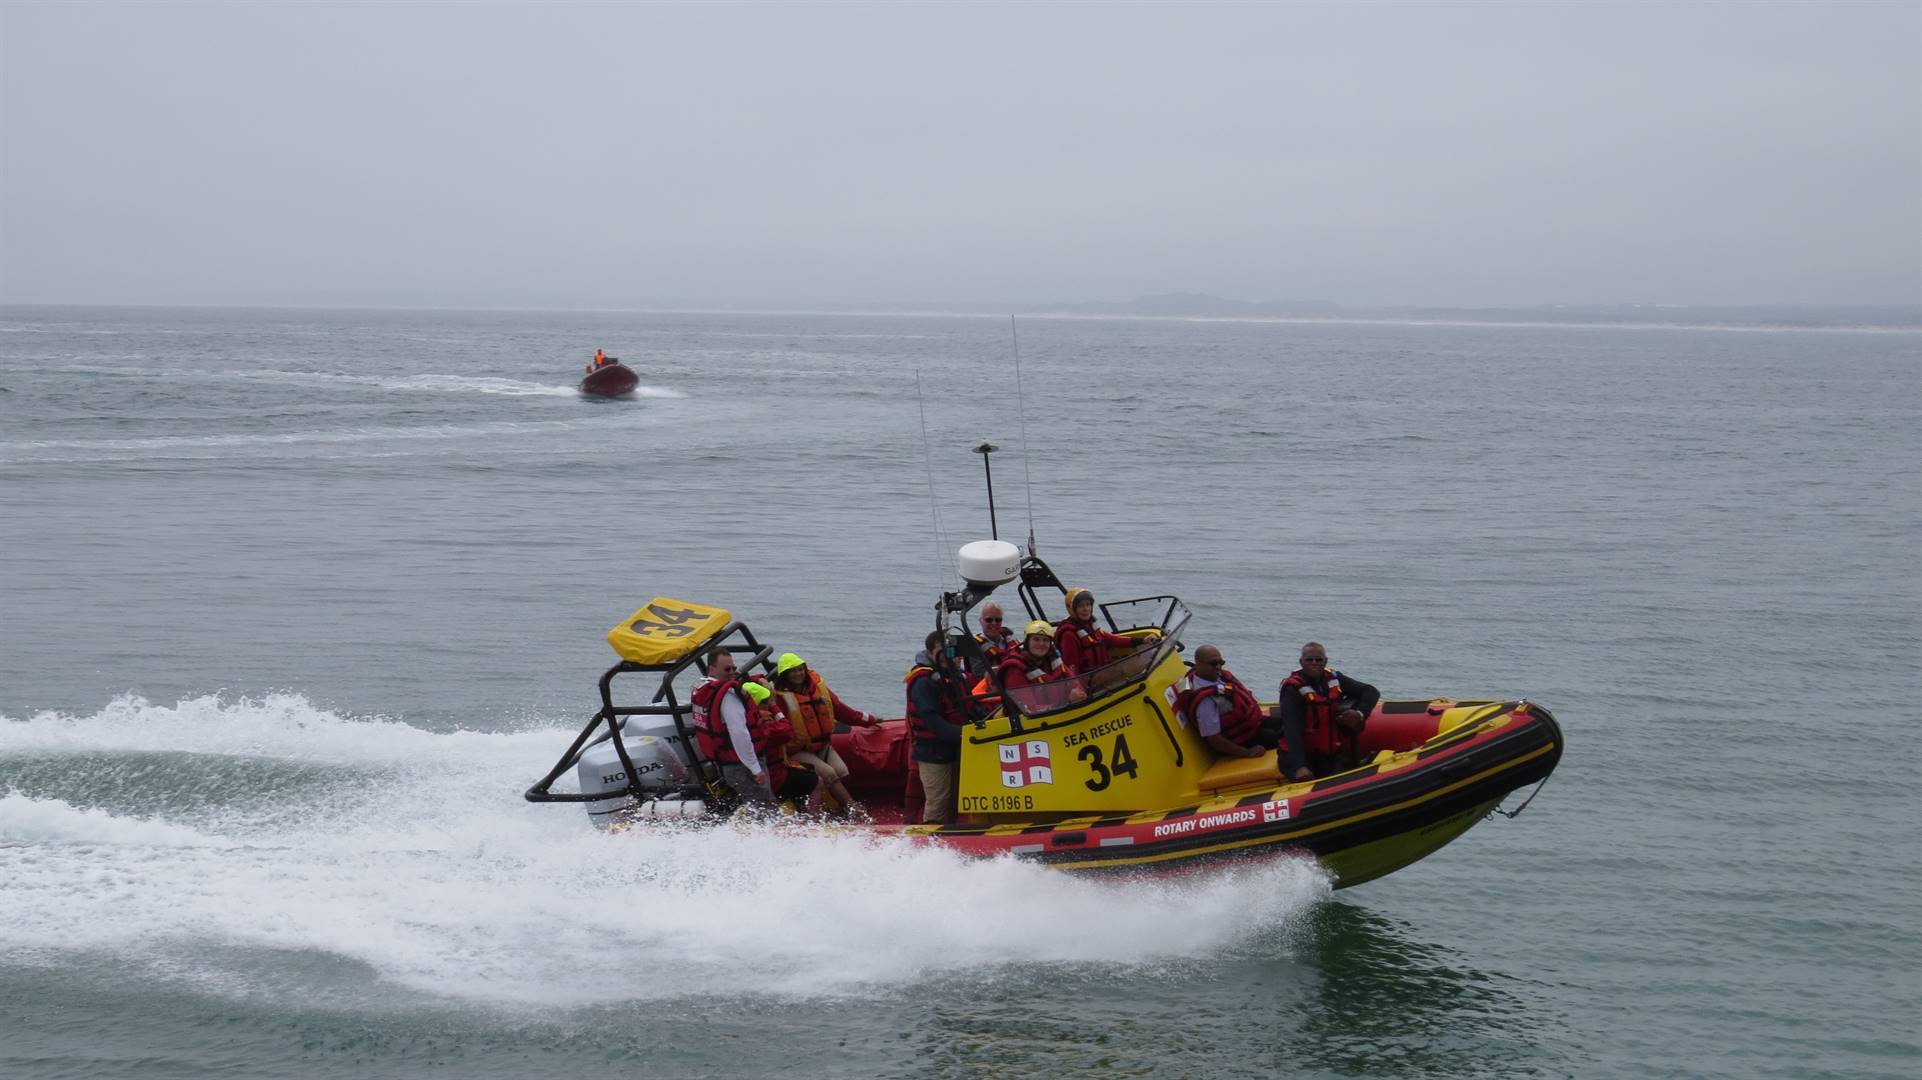 The National Sea Rescue Institute was called when eyewitnesses reported a drowning in progress at a beach next to the Gordon's Bay Naval Base.  